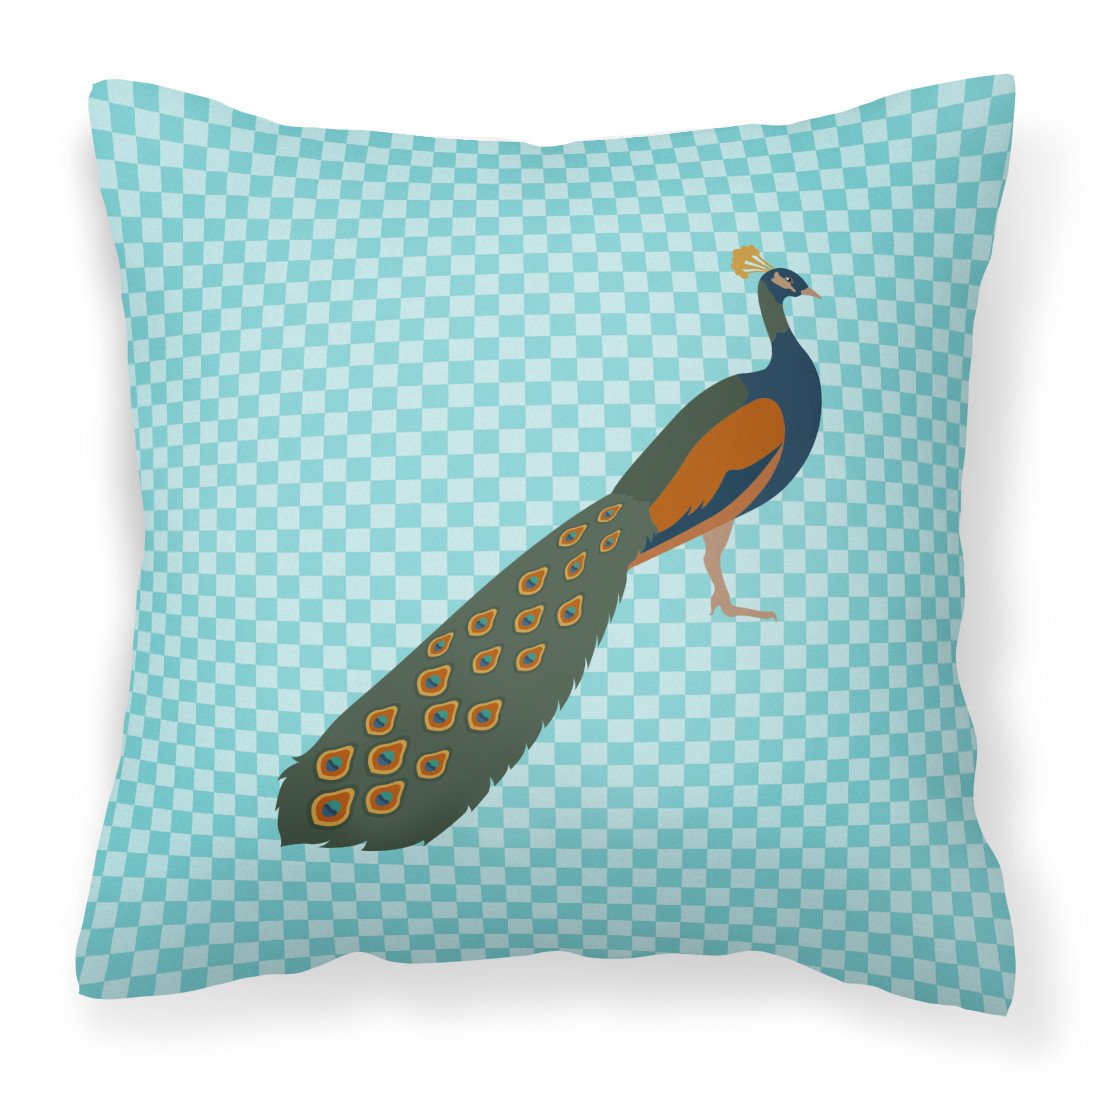 Indian Peacock Peafowl Blue Check Fabric Decorative Pillow BB8099PW1818 by Caroline's Treasures